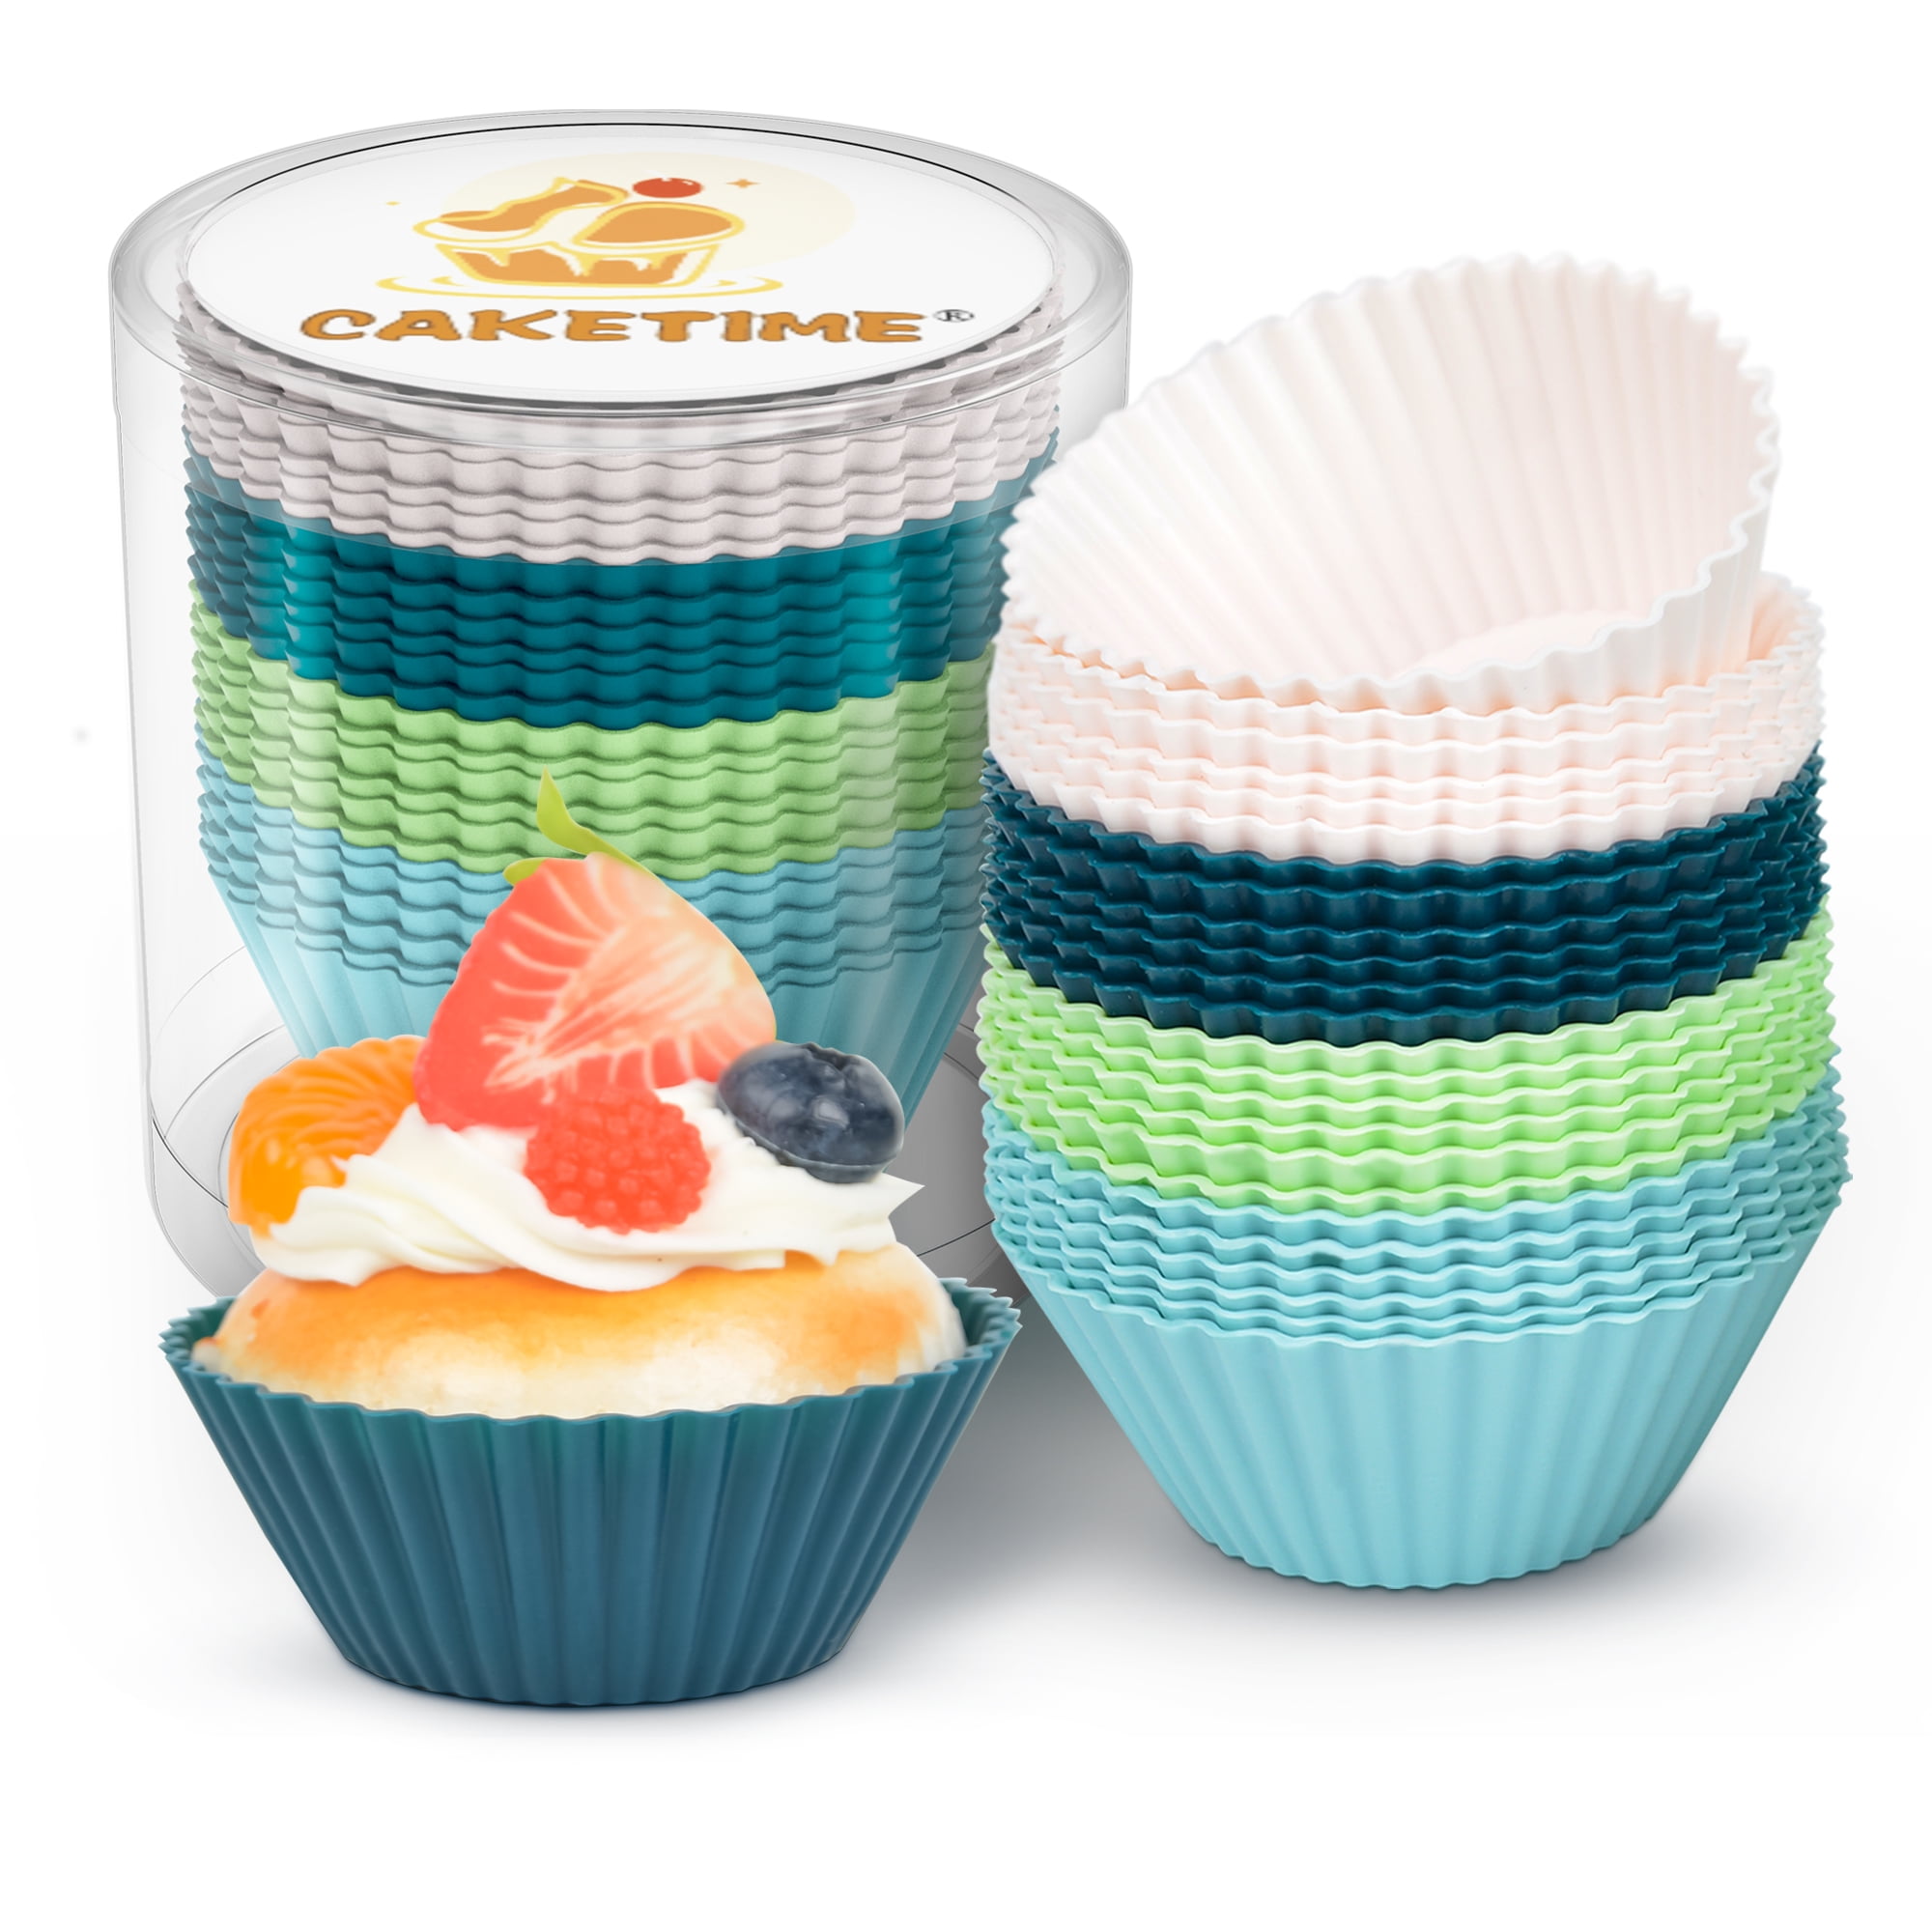  50-Pack Muffin Cups Baking Paper Cup Cupcake Muffins Liners Red  and White Stripes Baking Cups, Bottom Dia 2.3 Inch: Home & Kitchen